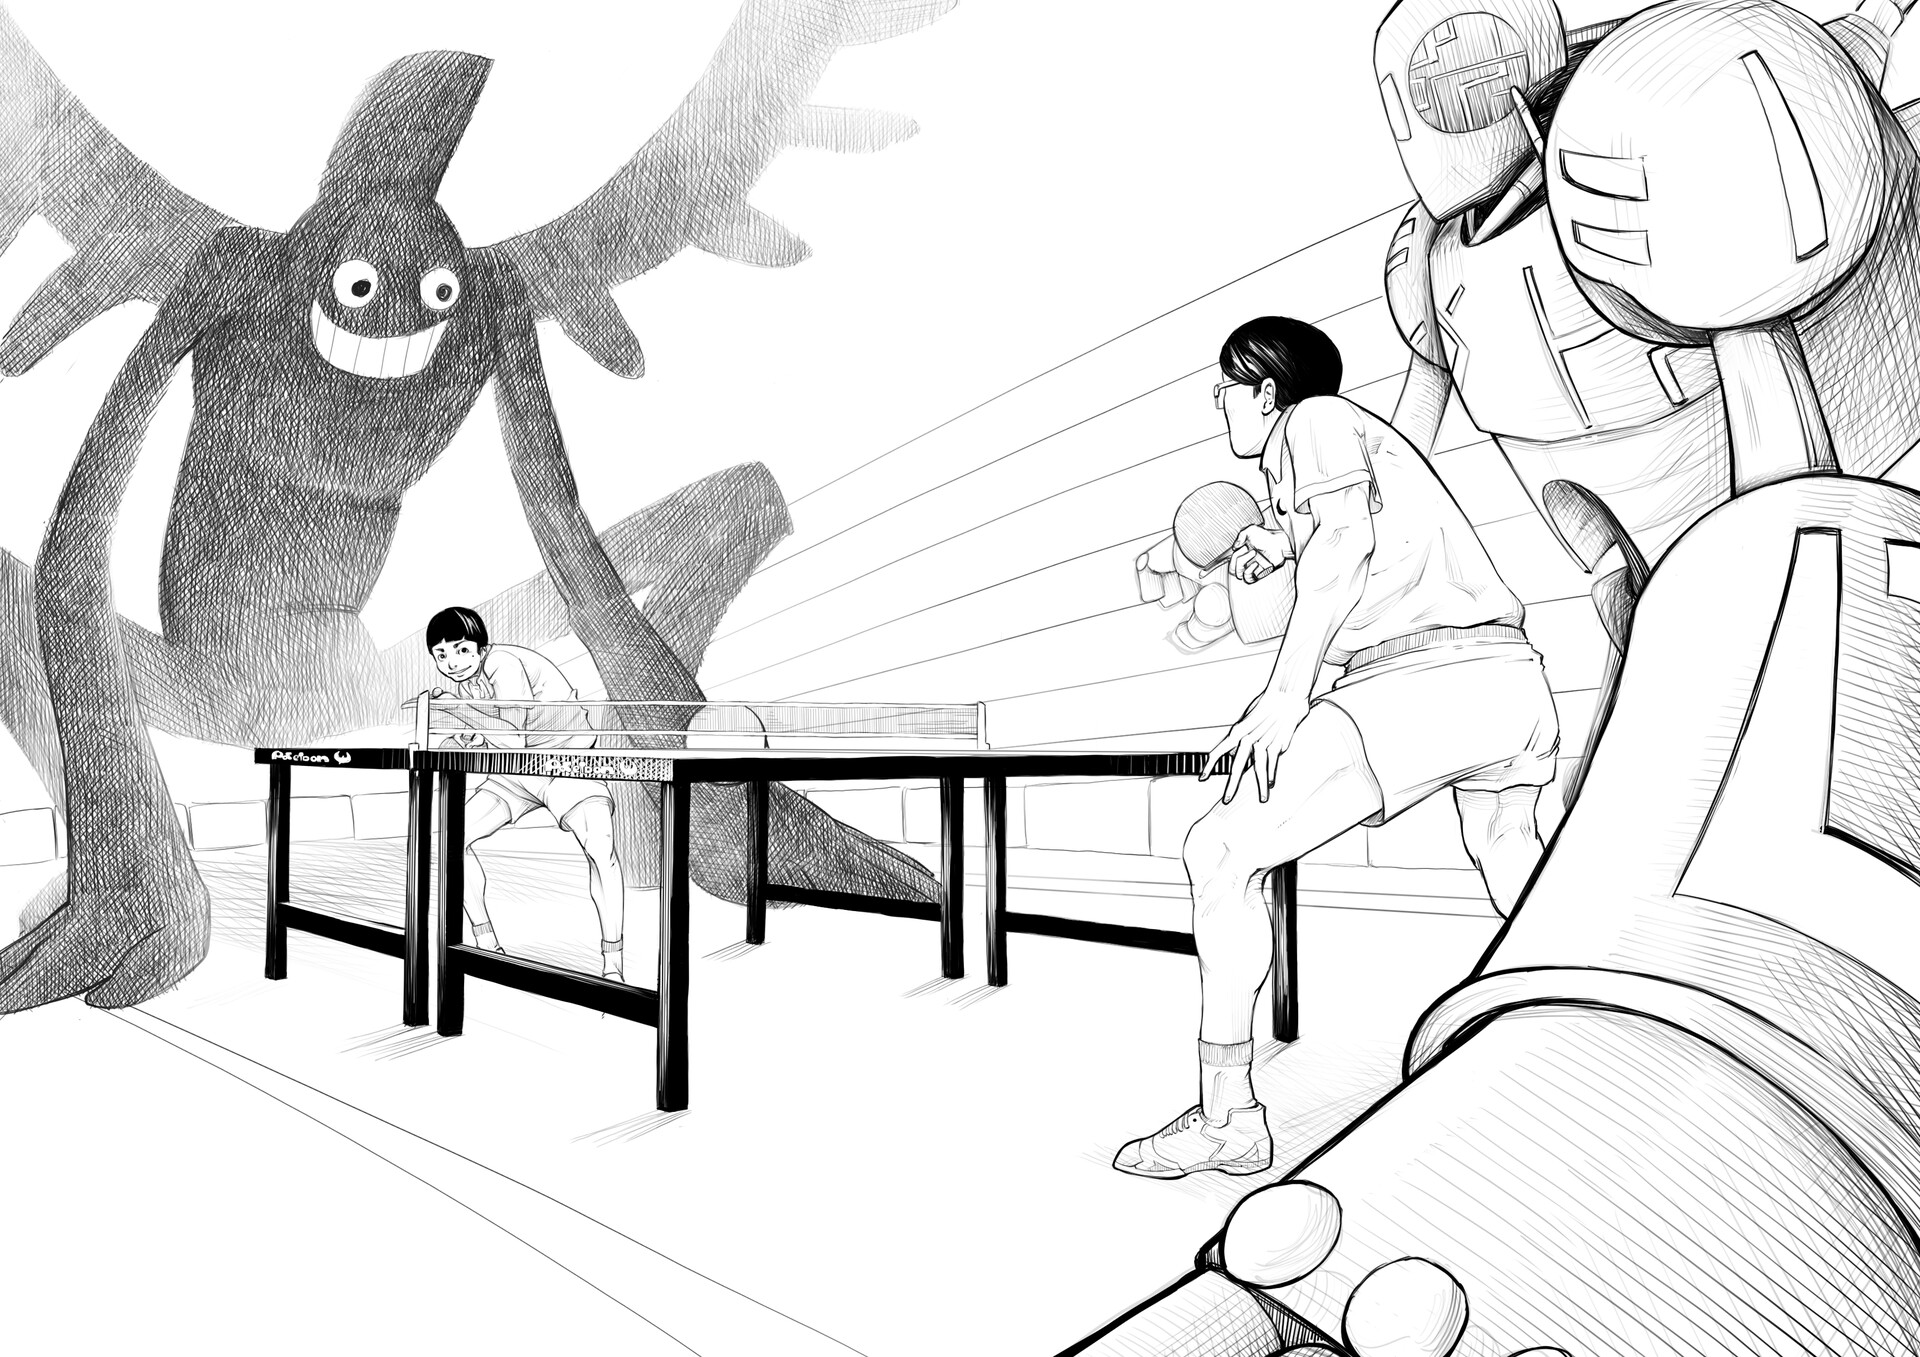 First Look: Ping Pong – The Animation